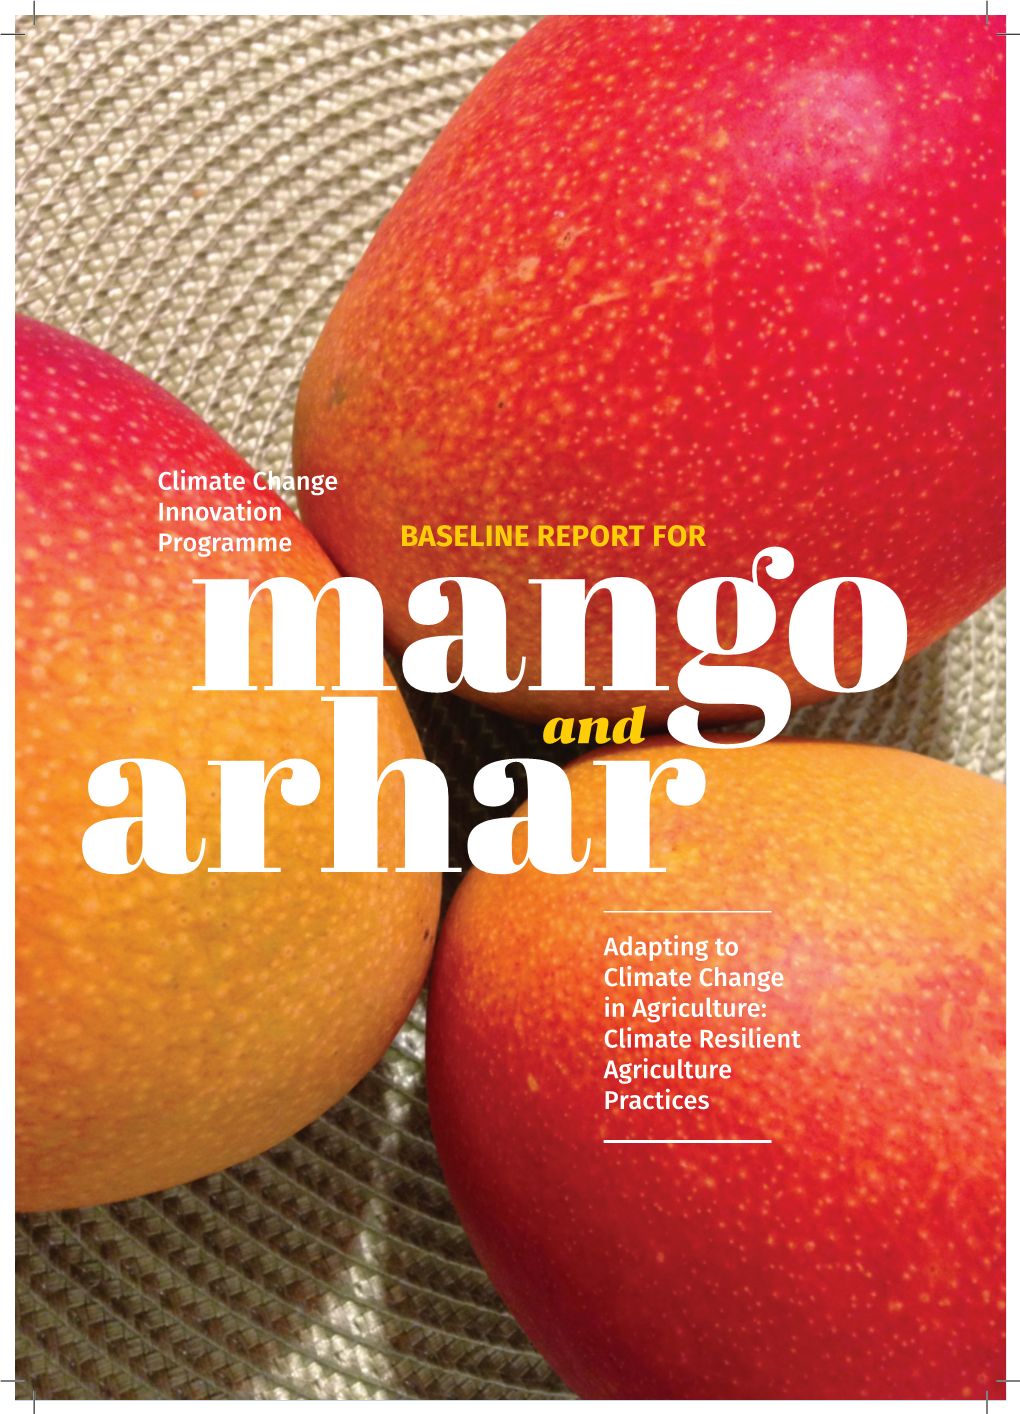 Baseline Report for Mango and Arhar Value Chain Value Arhar and Mango for Report Baseline